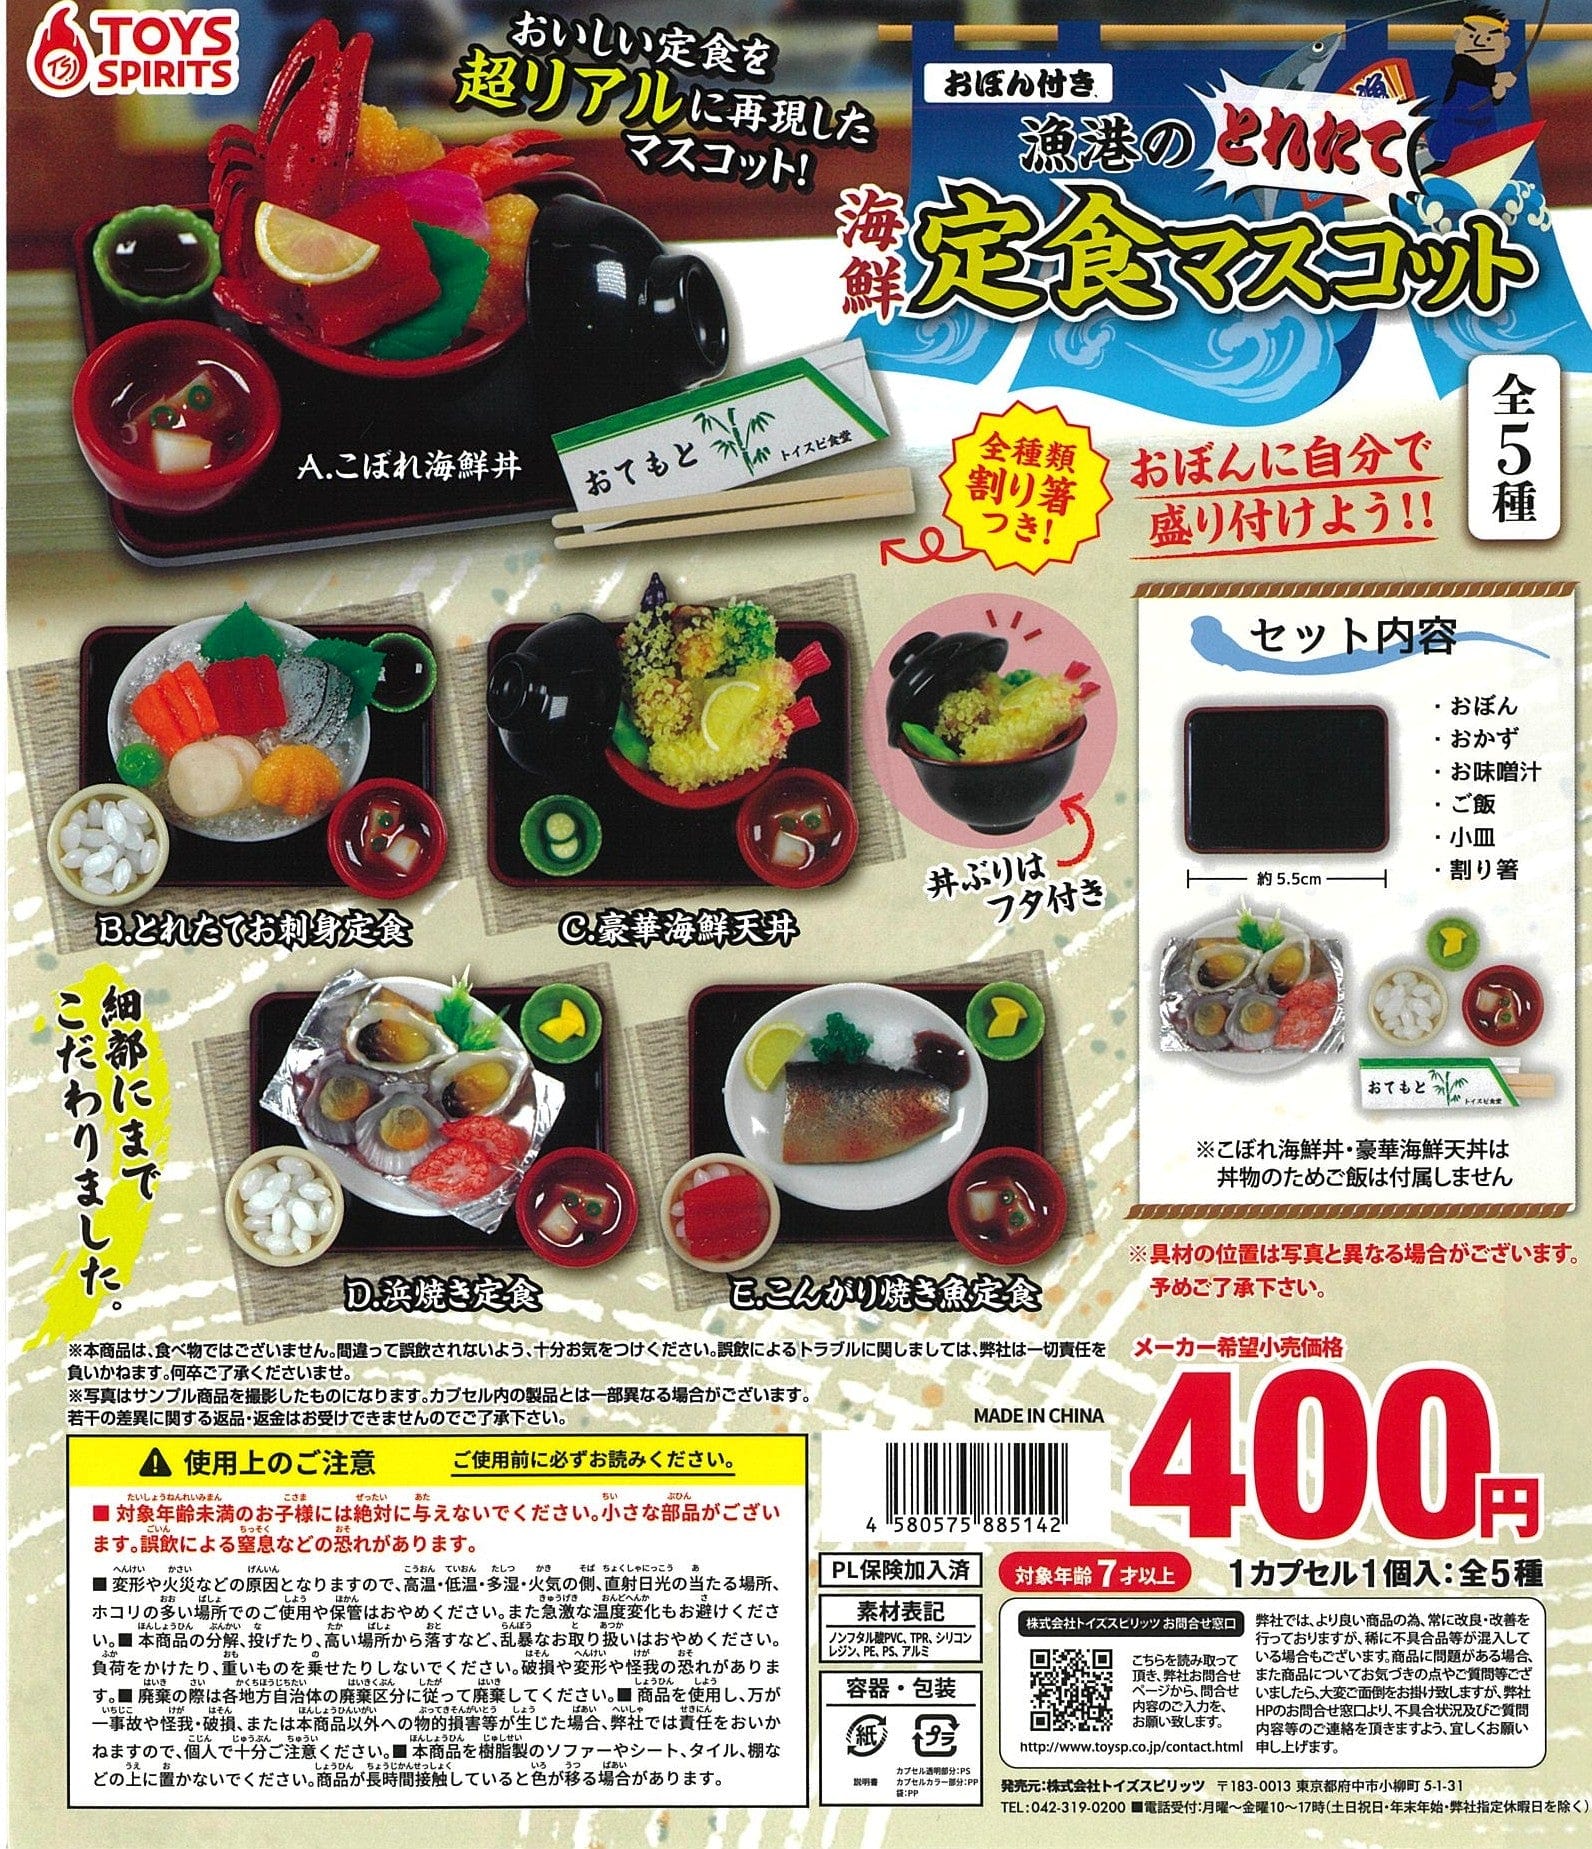 TOYS SPIRITS CP2376 With a Tray ! Fresh Seafood Set Meal from The Fishing Port Mascot